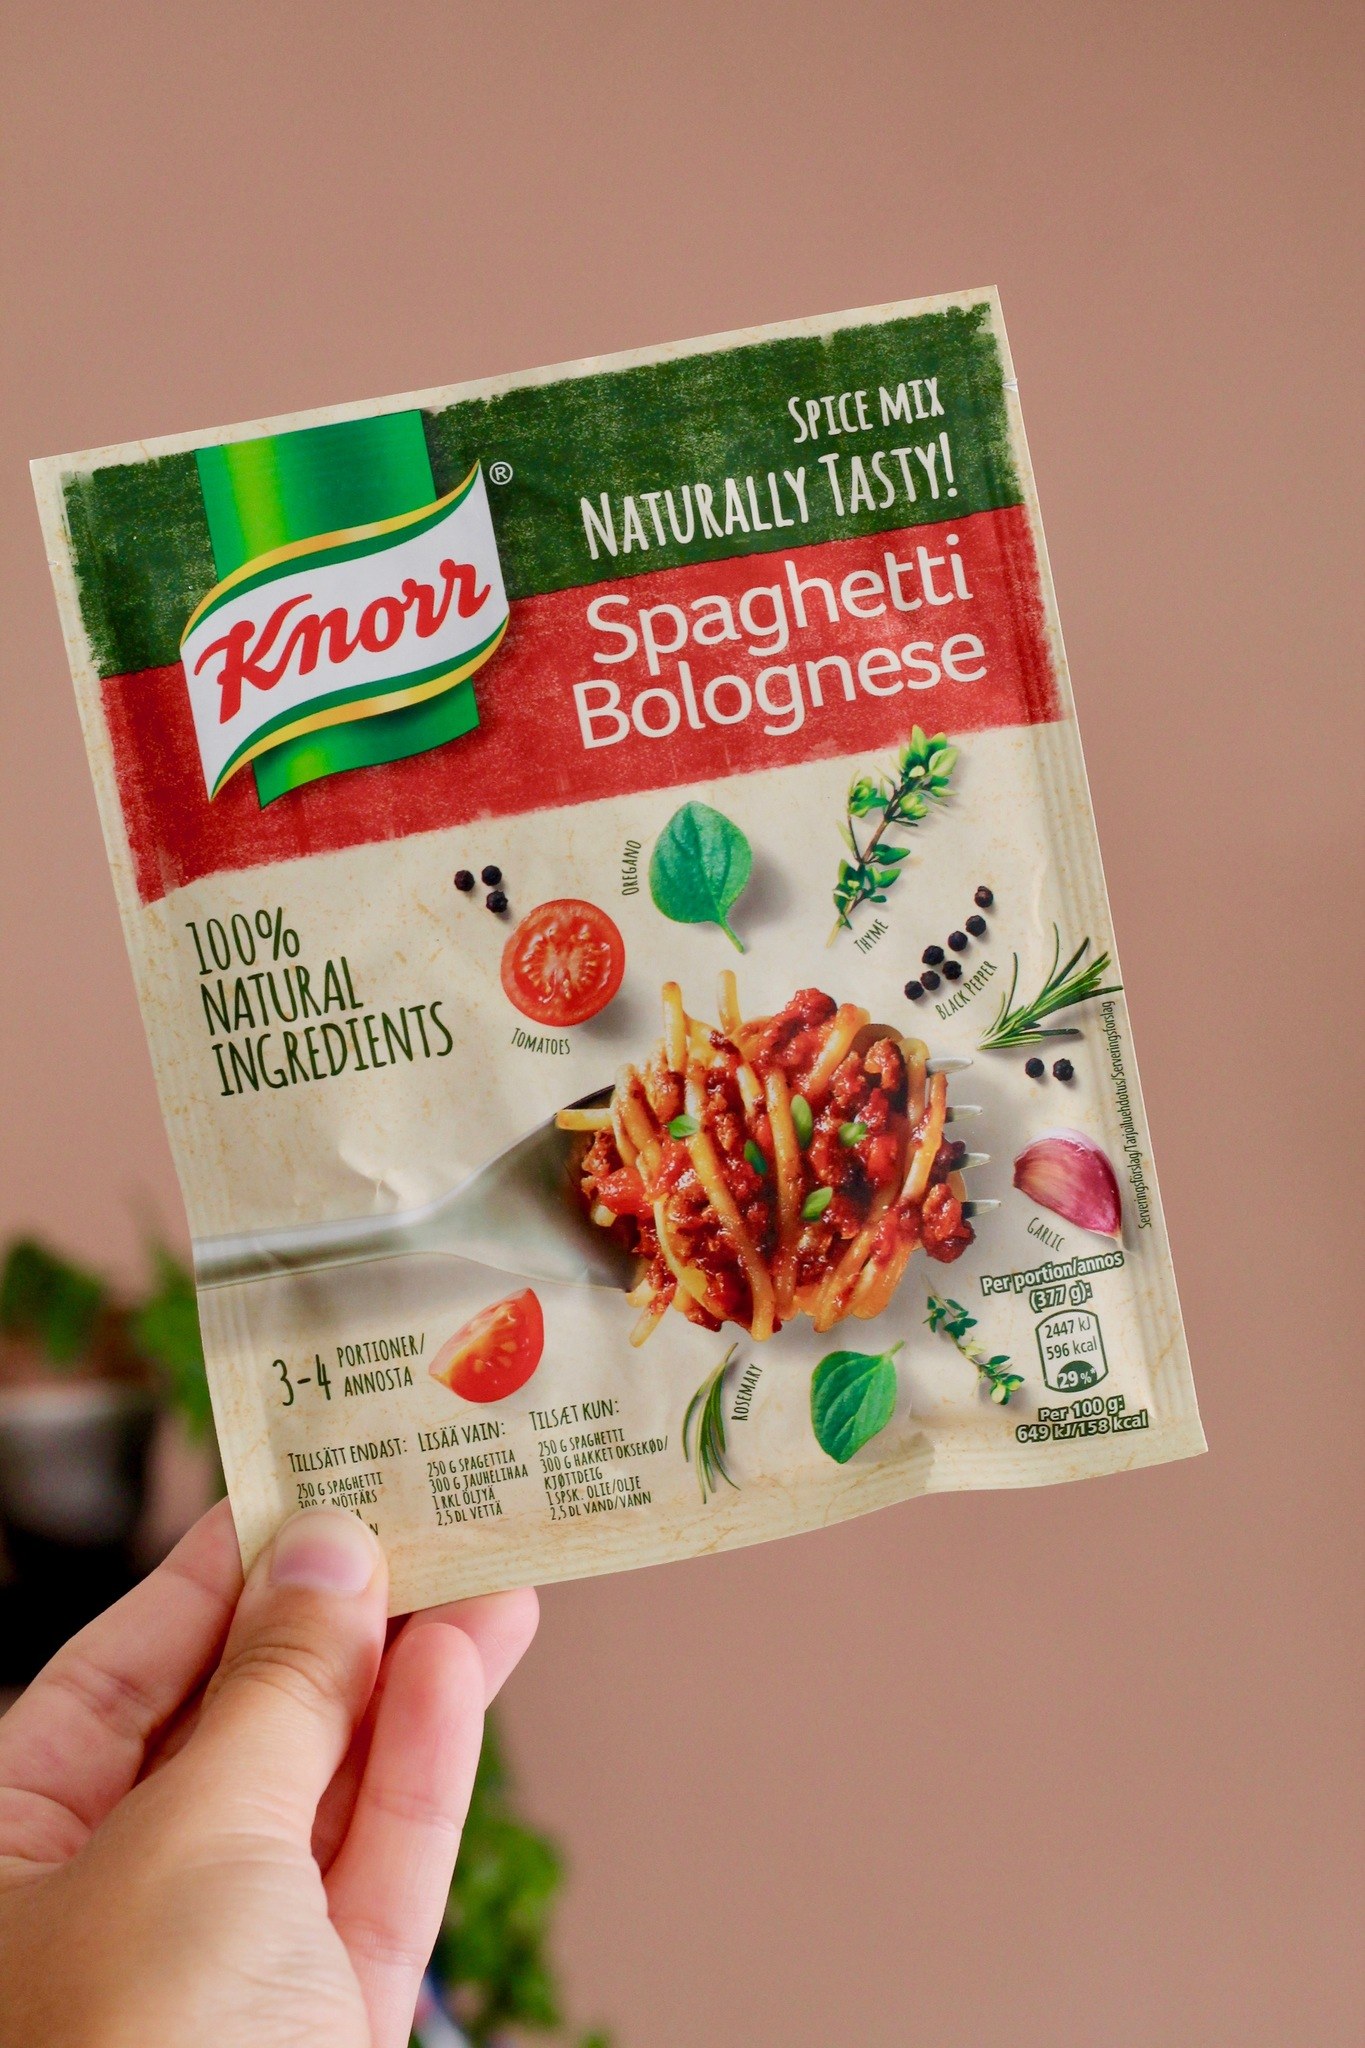 Knorr spaghetti bolognese spice mix